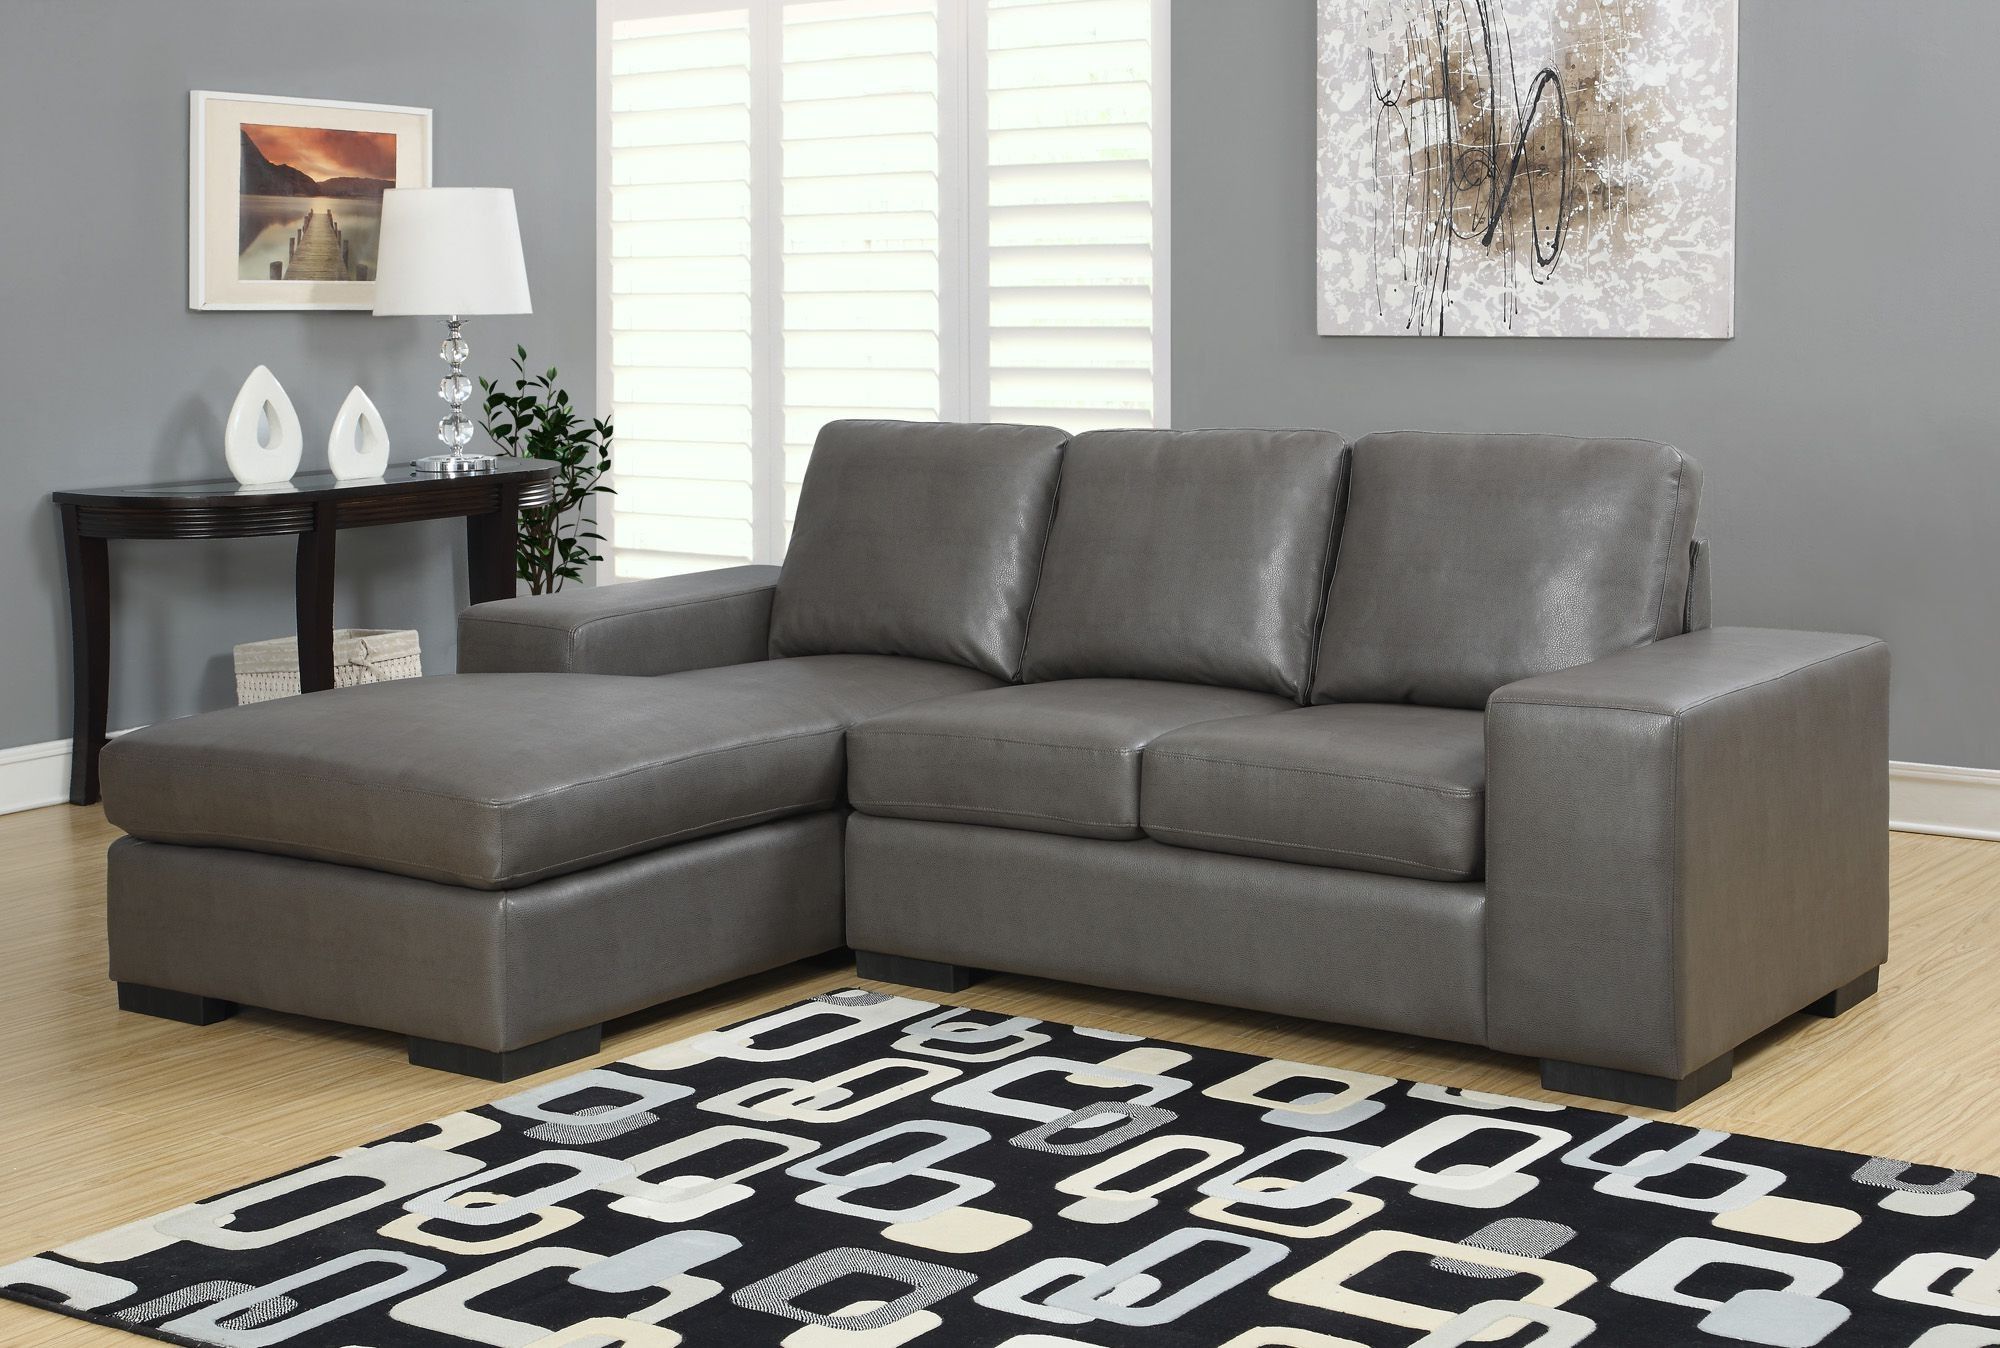 Most Current Sectional Sofas In Gray Intended For Charcoal Gray Bonded Leather/match Sofa Sectional From (View 7 of 25)